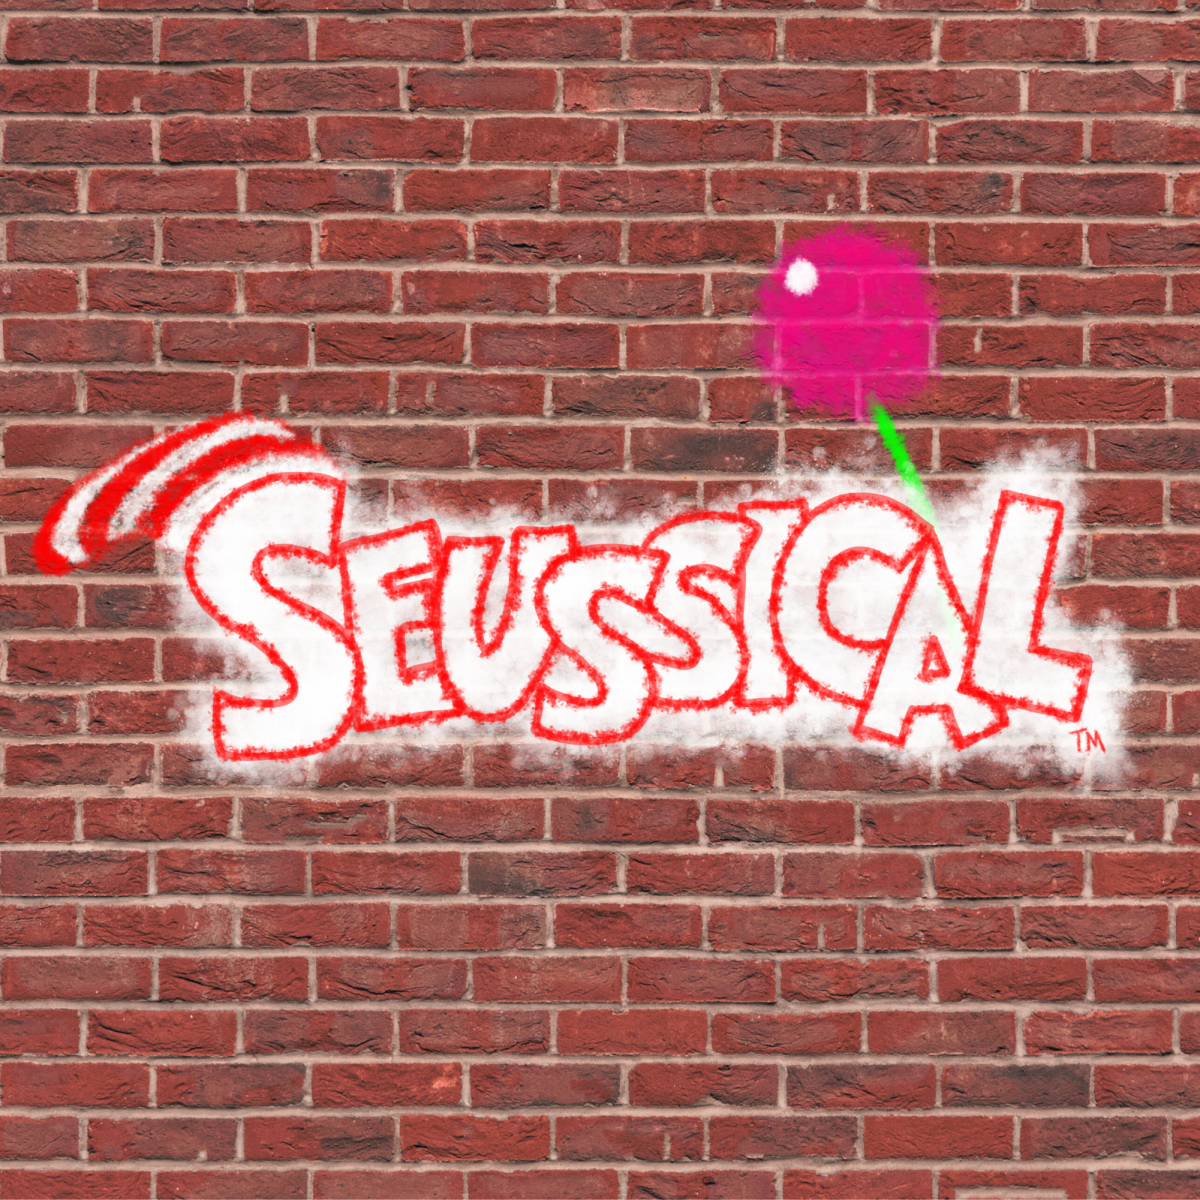 Seussical%3A+The+Musical+will+be+performed+at+MIA+on+April+19th%2C+20th%2C+26th%2C+and+27th+of+2024.+Photo+credit+to+Christopher+Dayett.